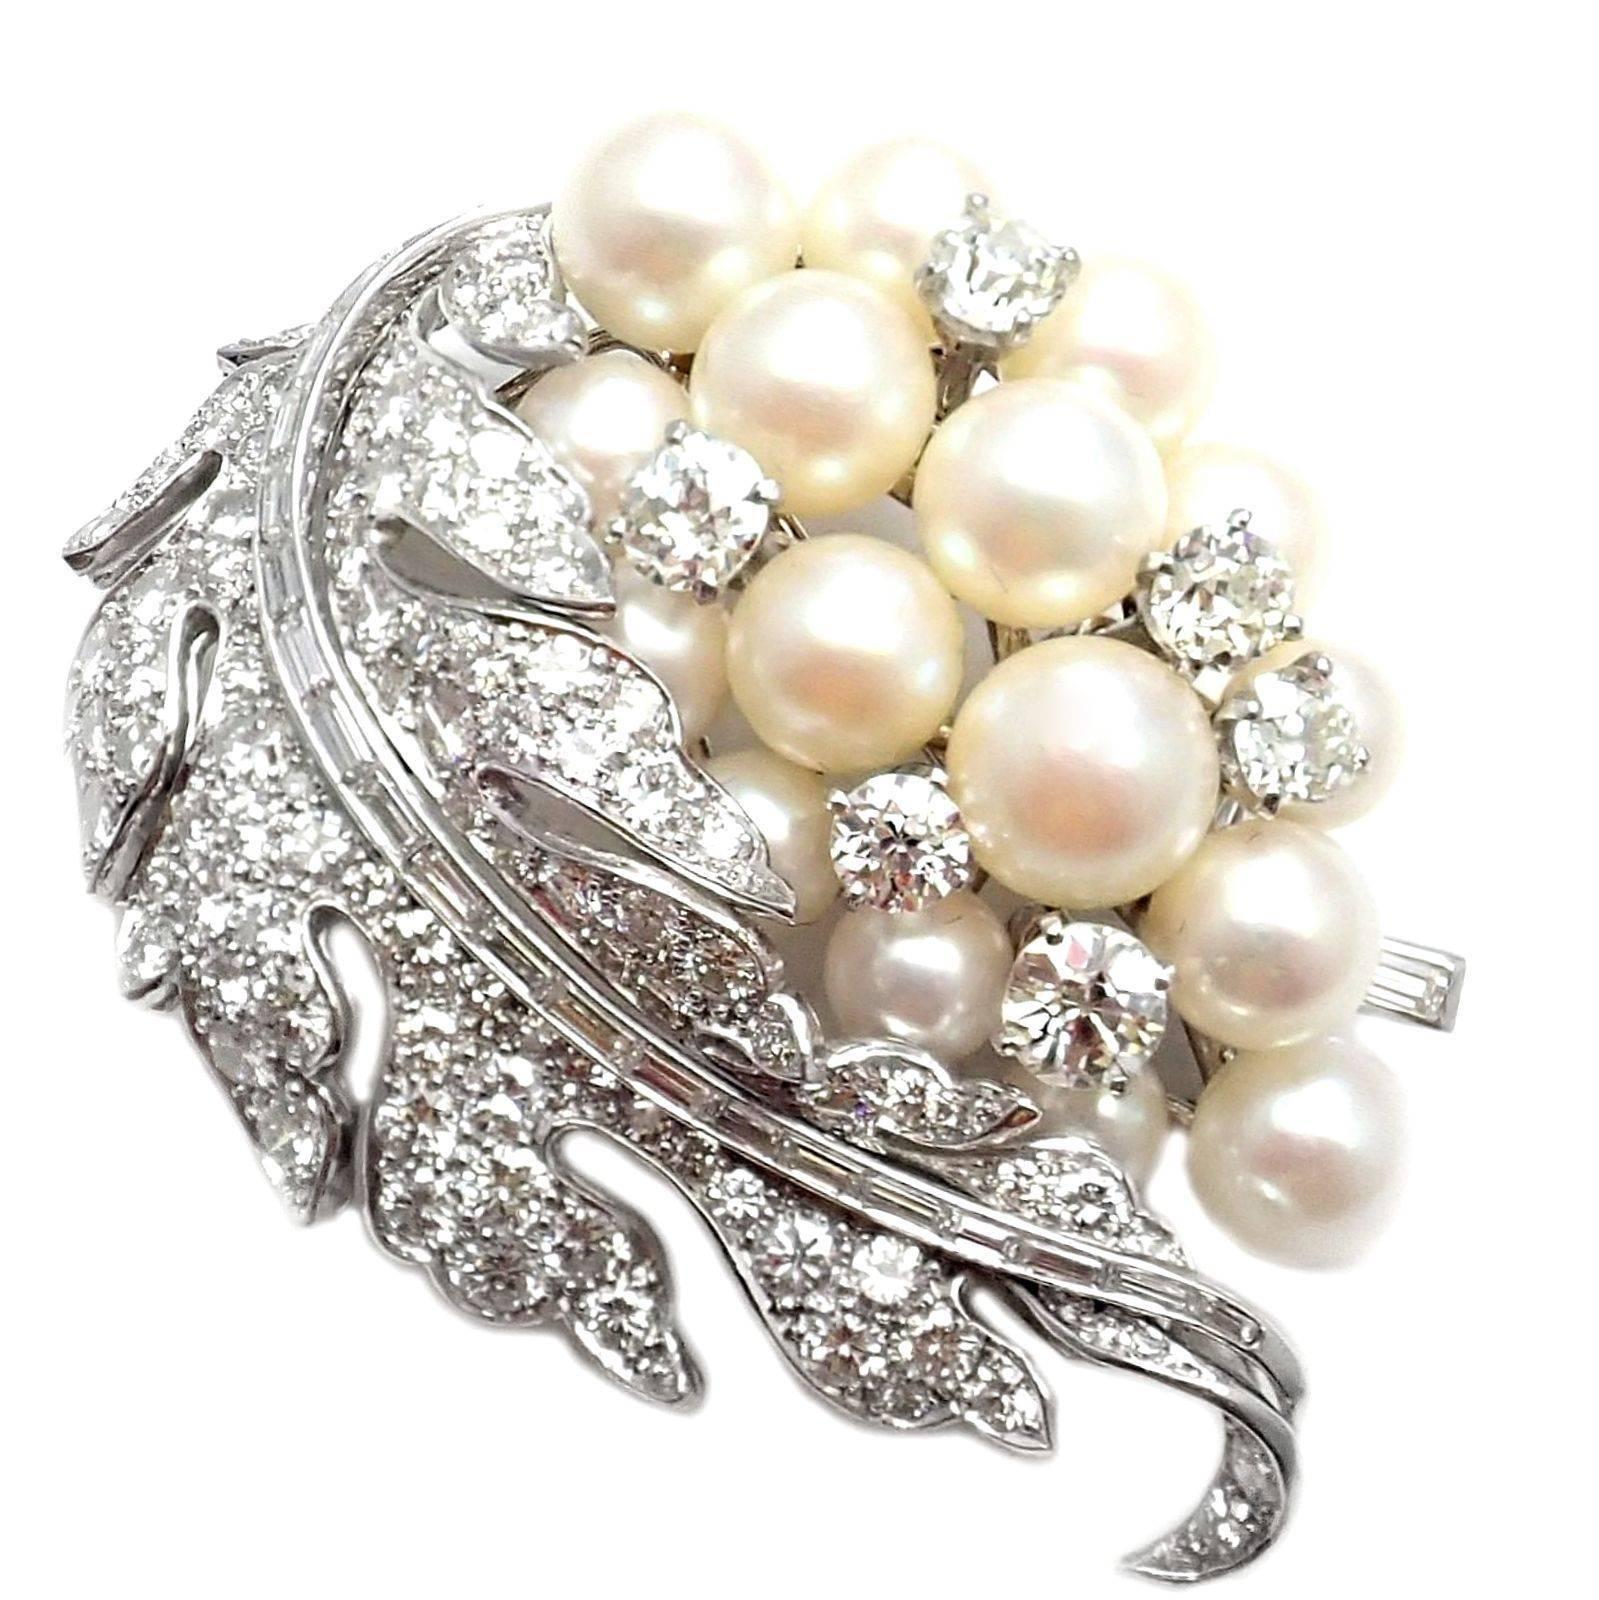 Estate Art Deco Platinum Diamond Pearl Pin Brooch
With 148 Total Diamonds, 7.5ctw
24 Emerald Cut Diamonds
124 Round Diamonds G Color/VS1 Clarity/Excellent Cut
15x Pearls Total Range 8.5mm to 6mm
Details:
Measurements: 41mm x 52mm
Weight: 32.6